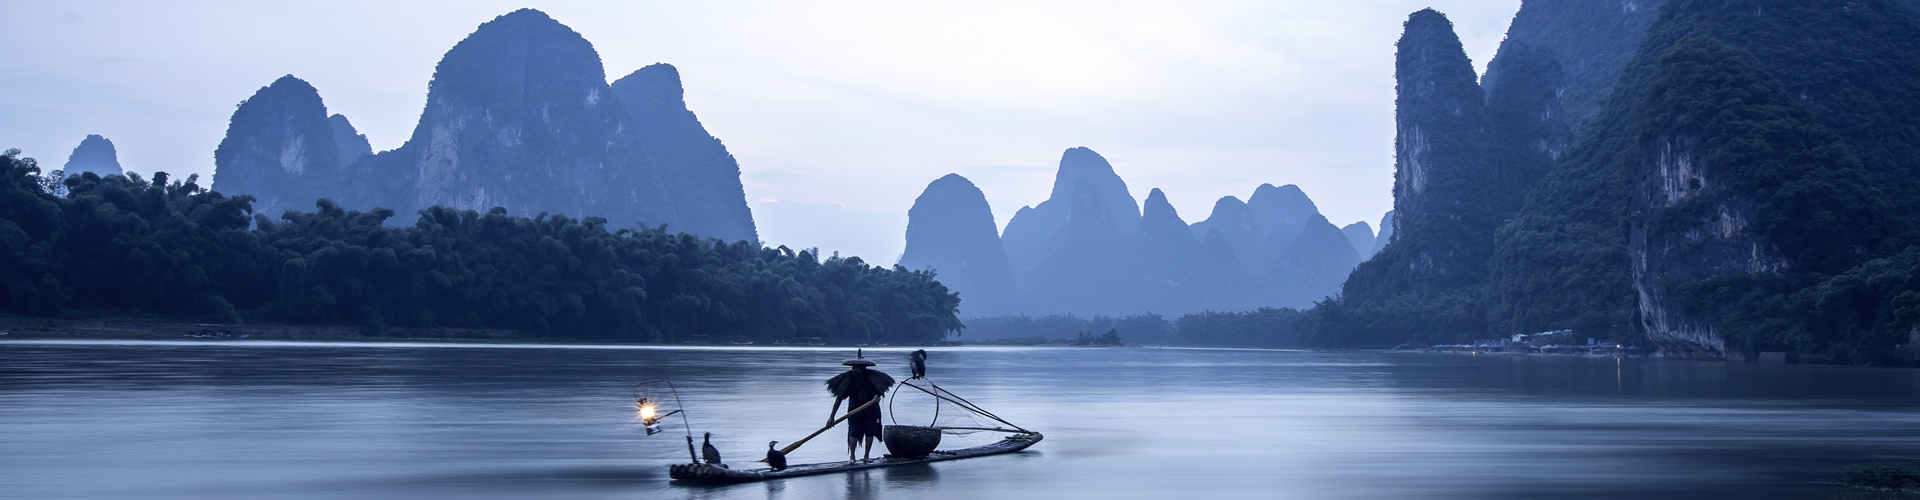 The Li River - Highlights and Travel Tips